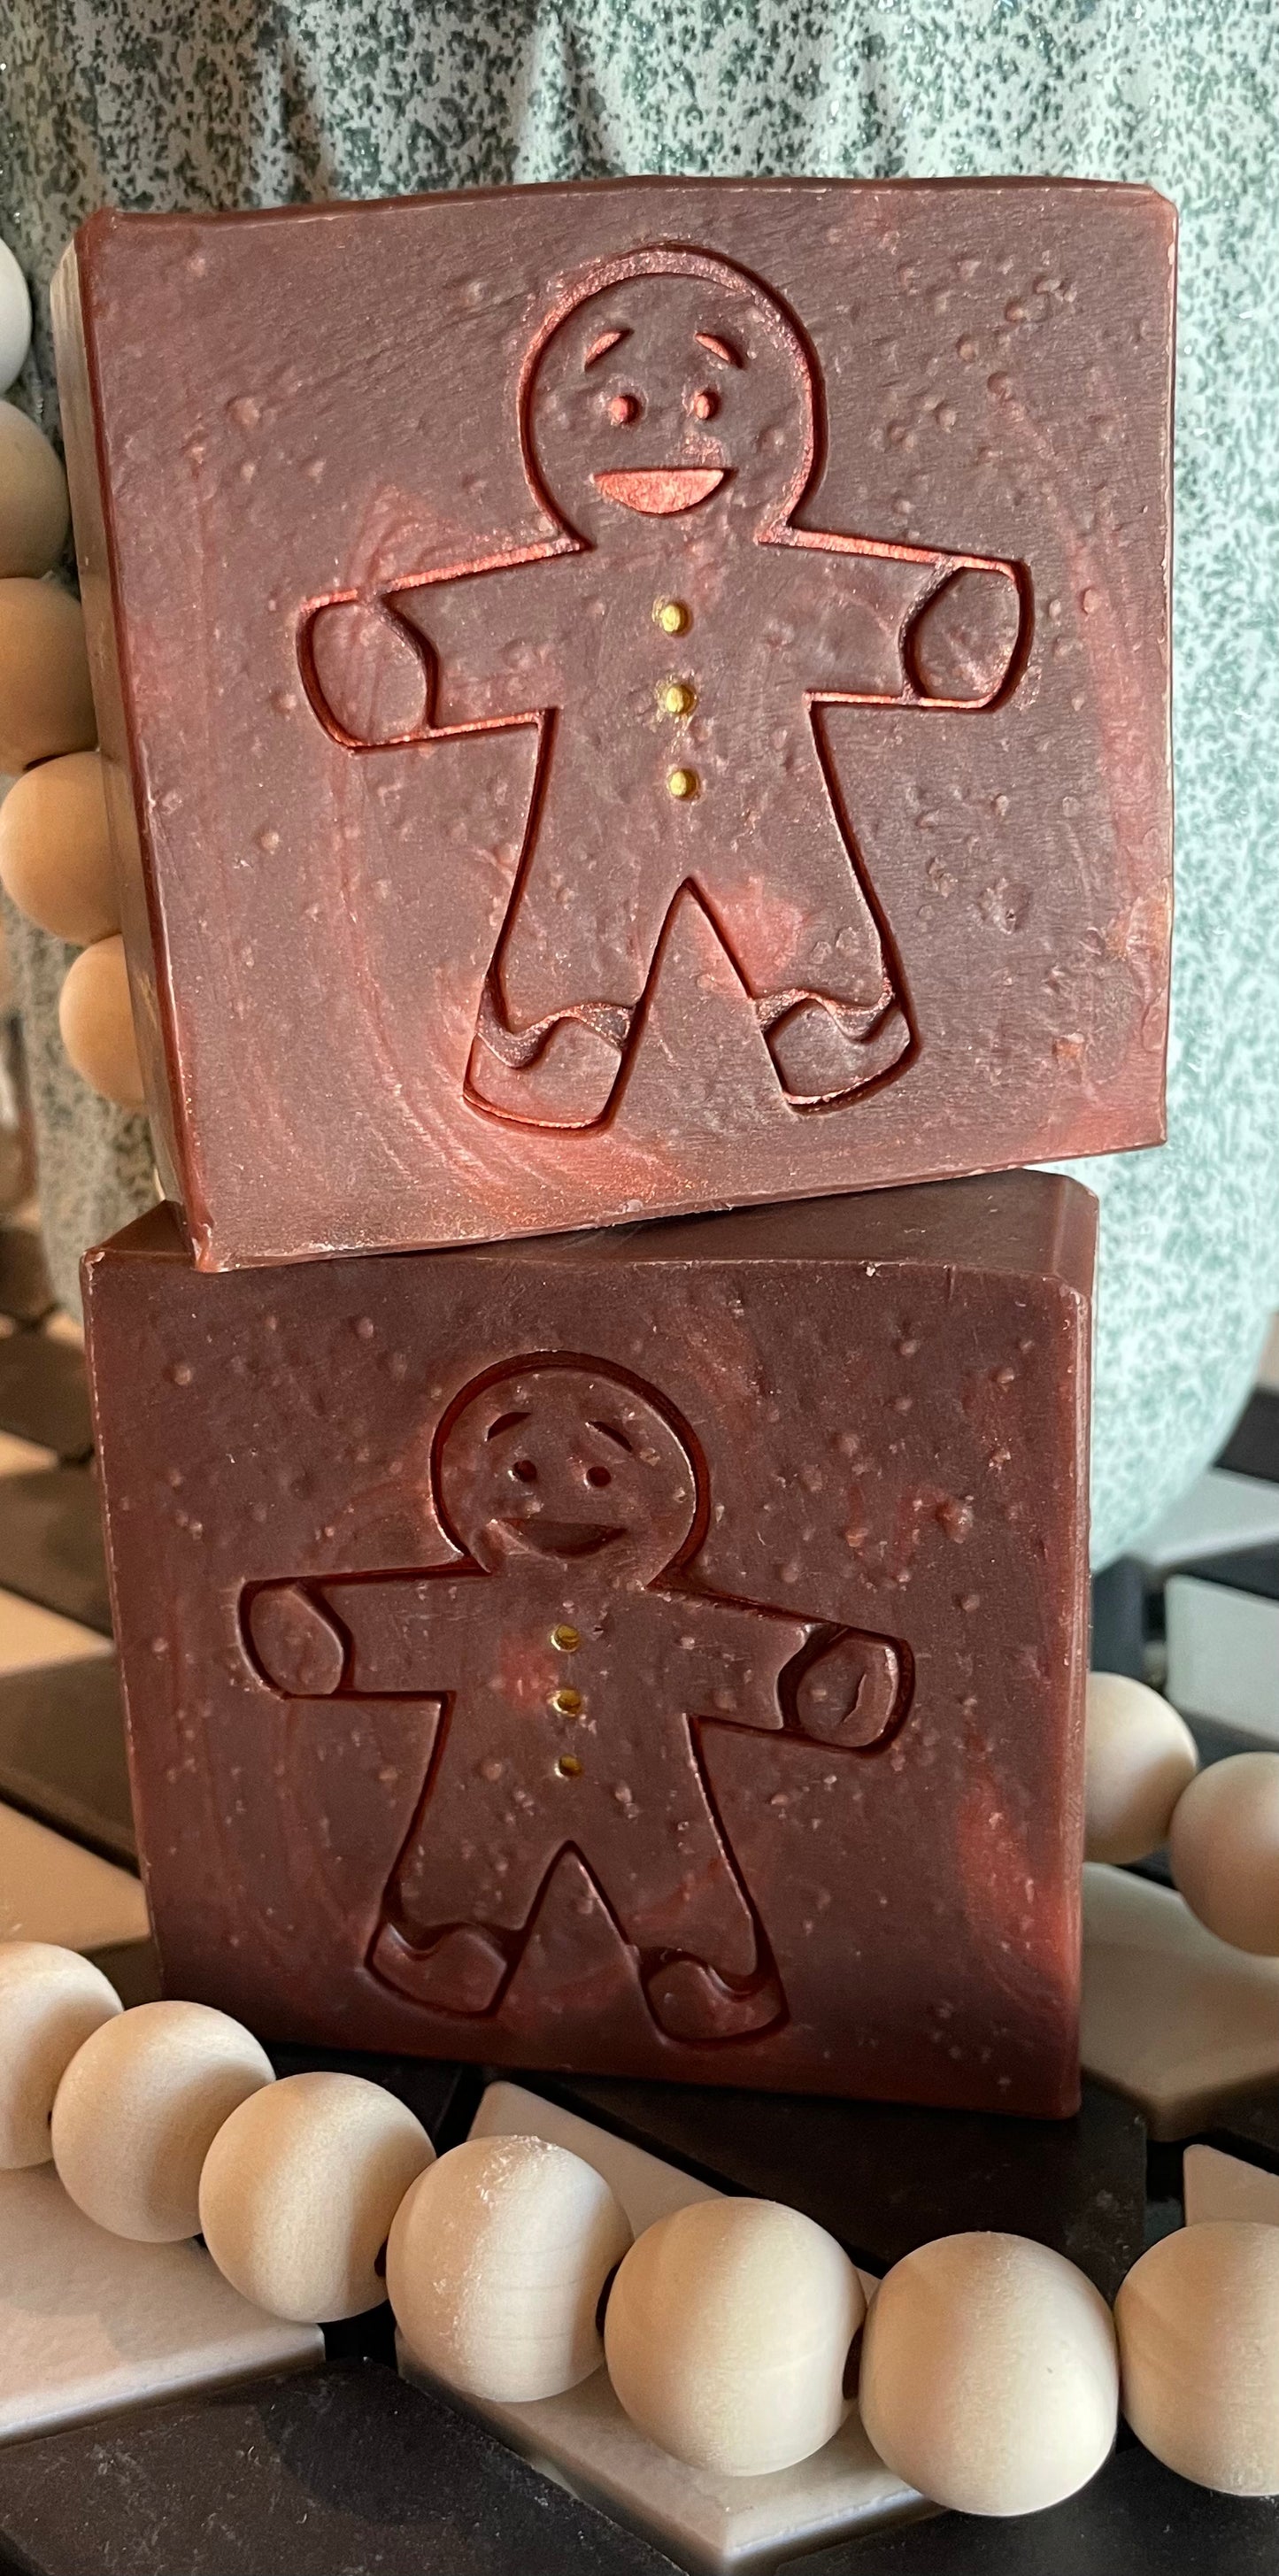 Gingerbread Man Soap (chocolate scent)